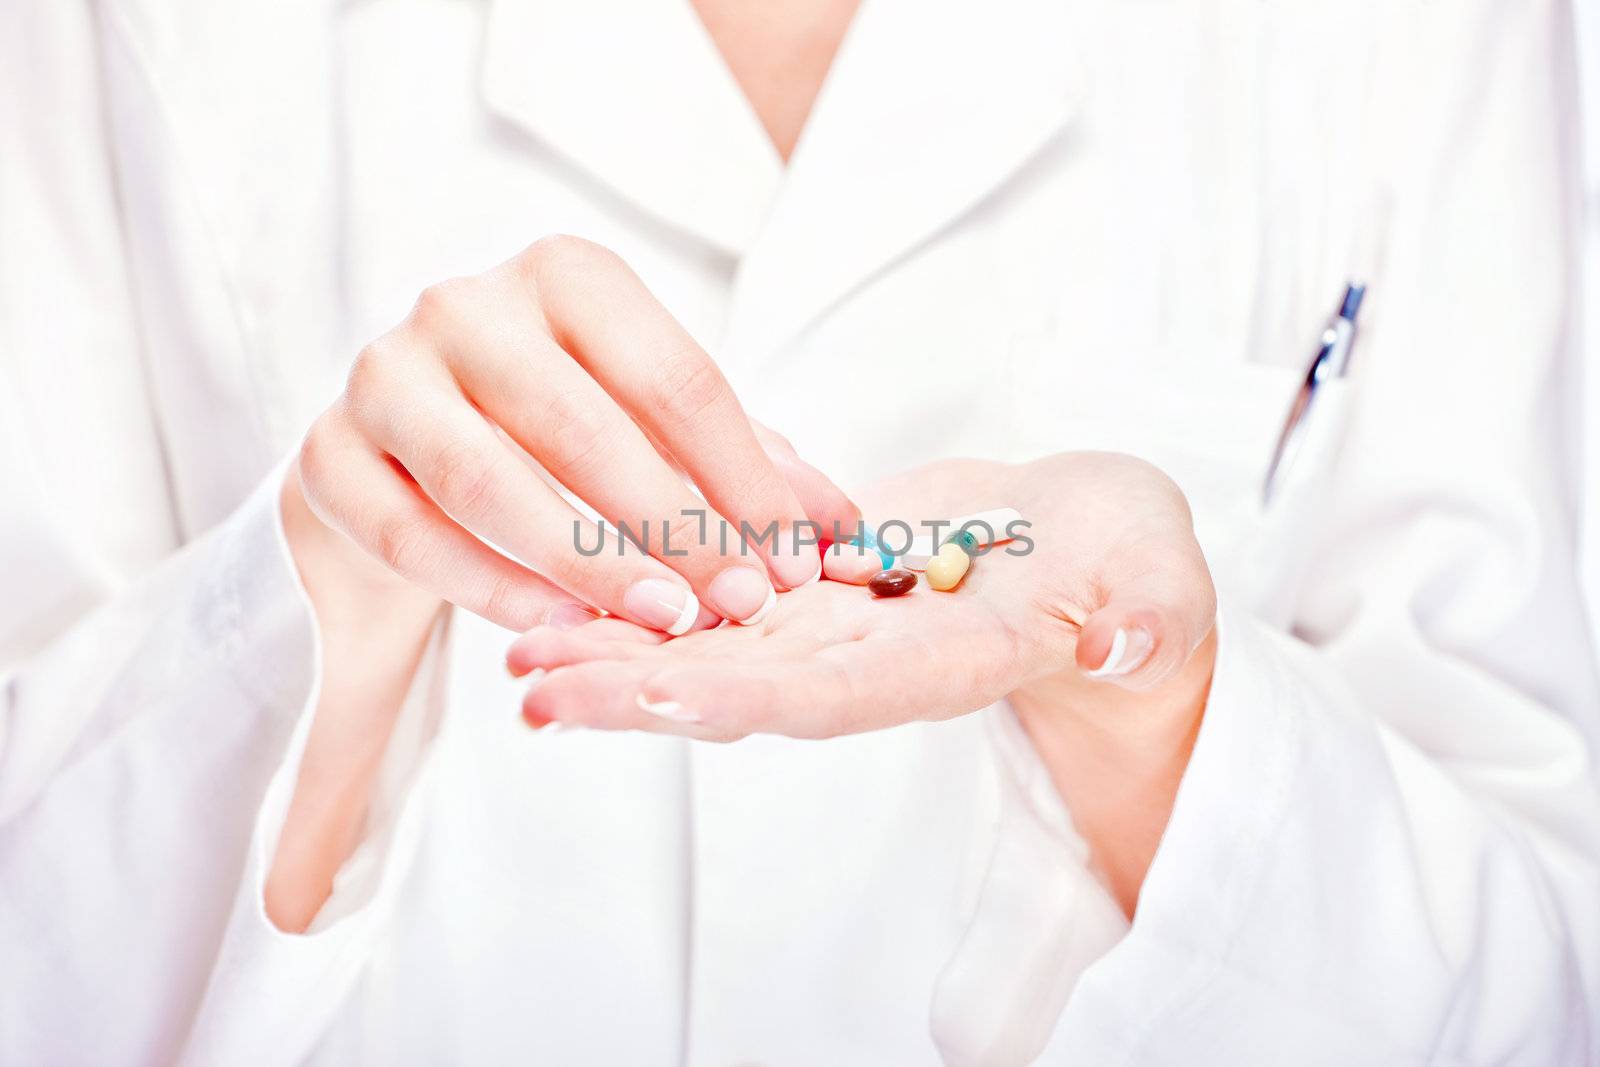 Pills in doctor's hands by imarin